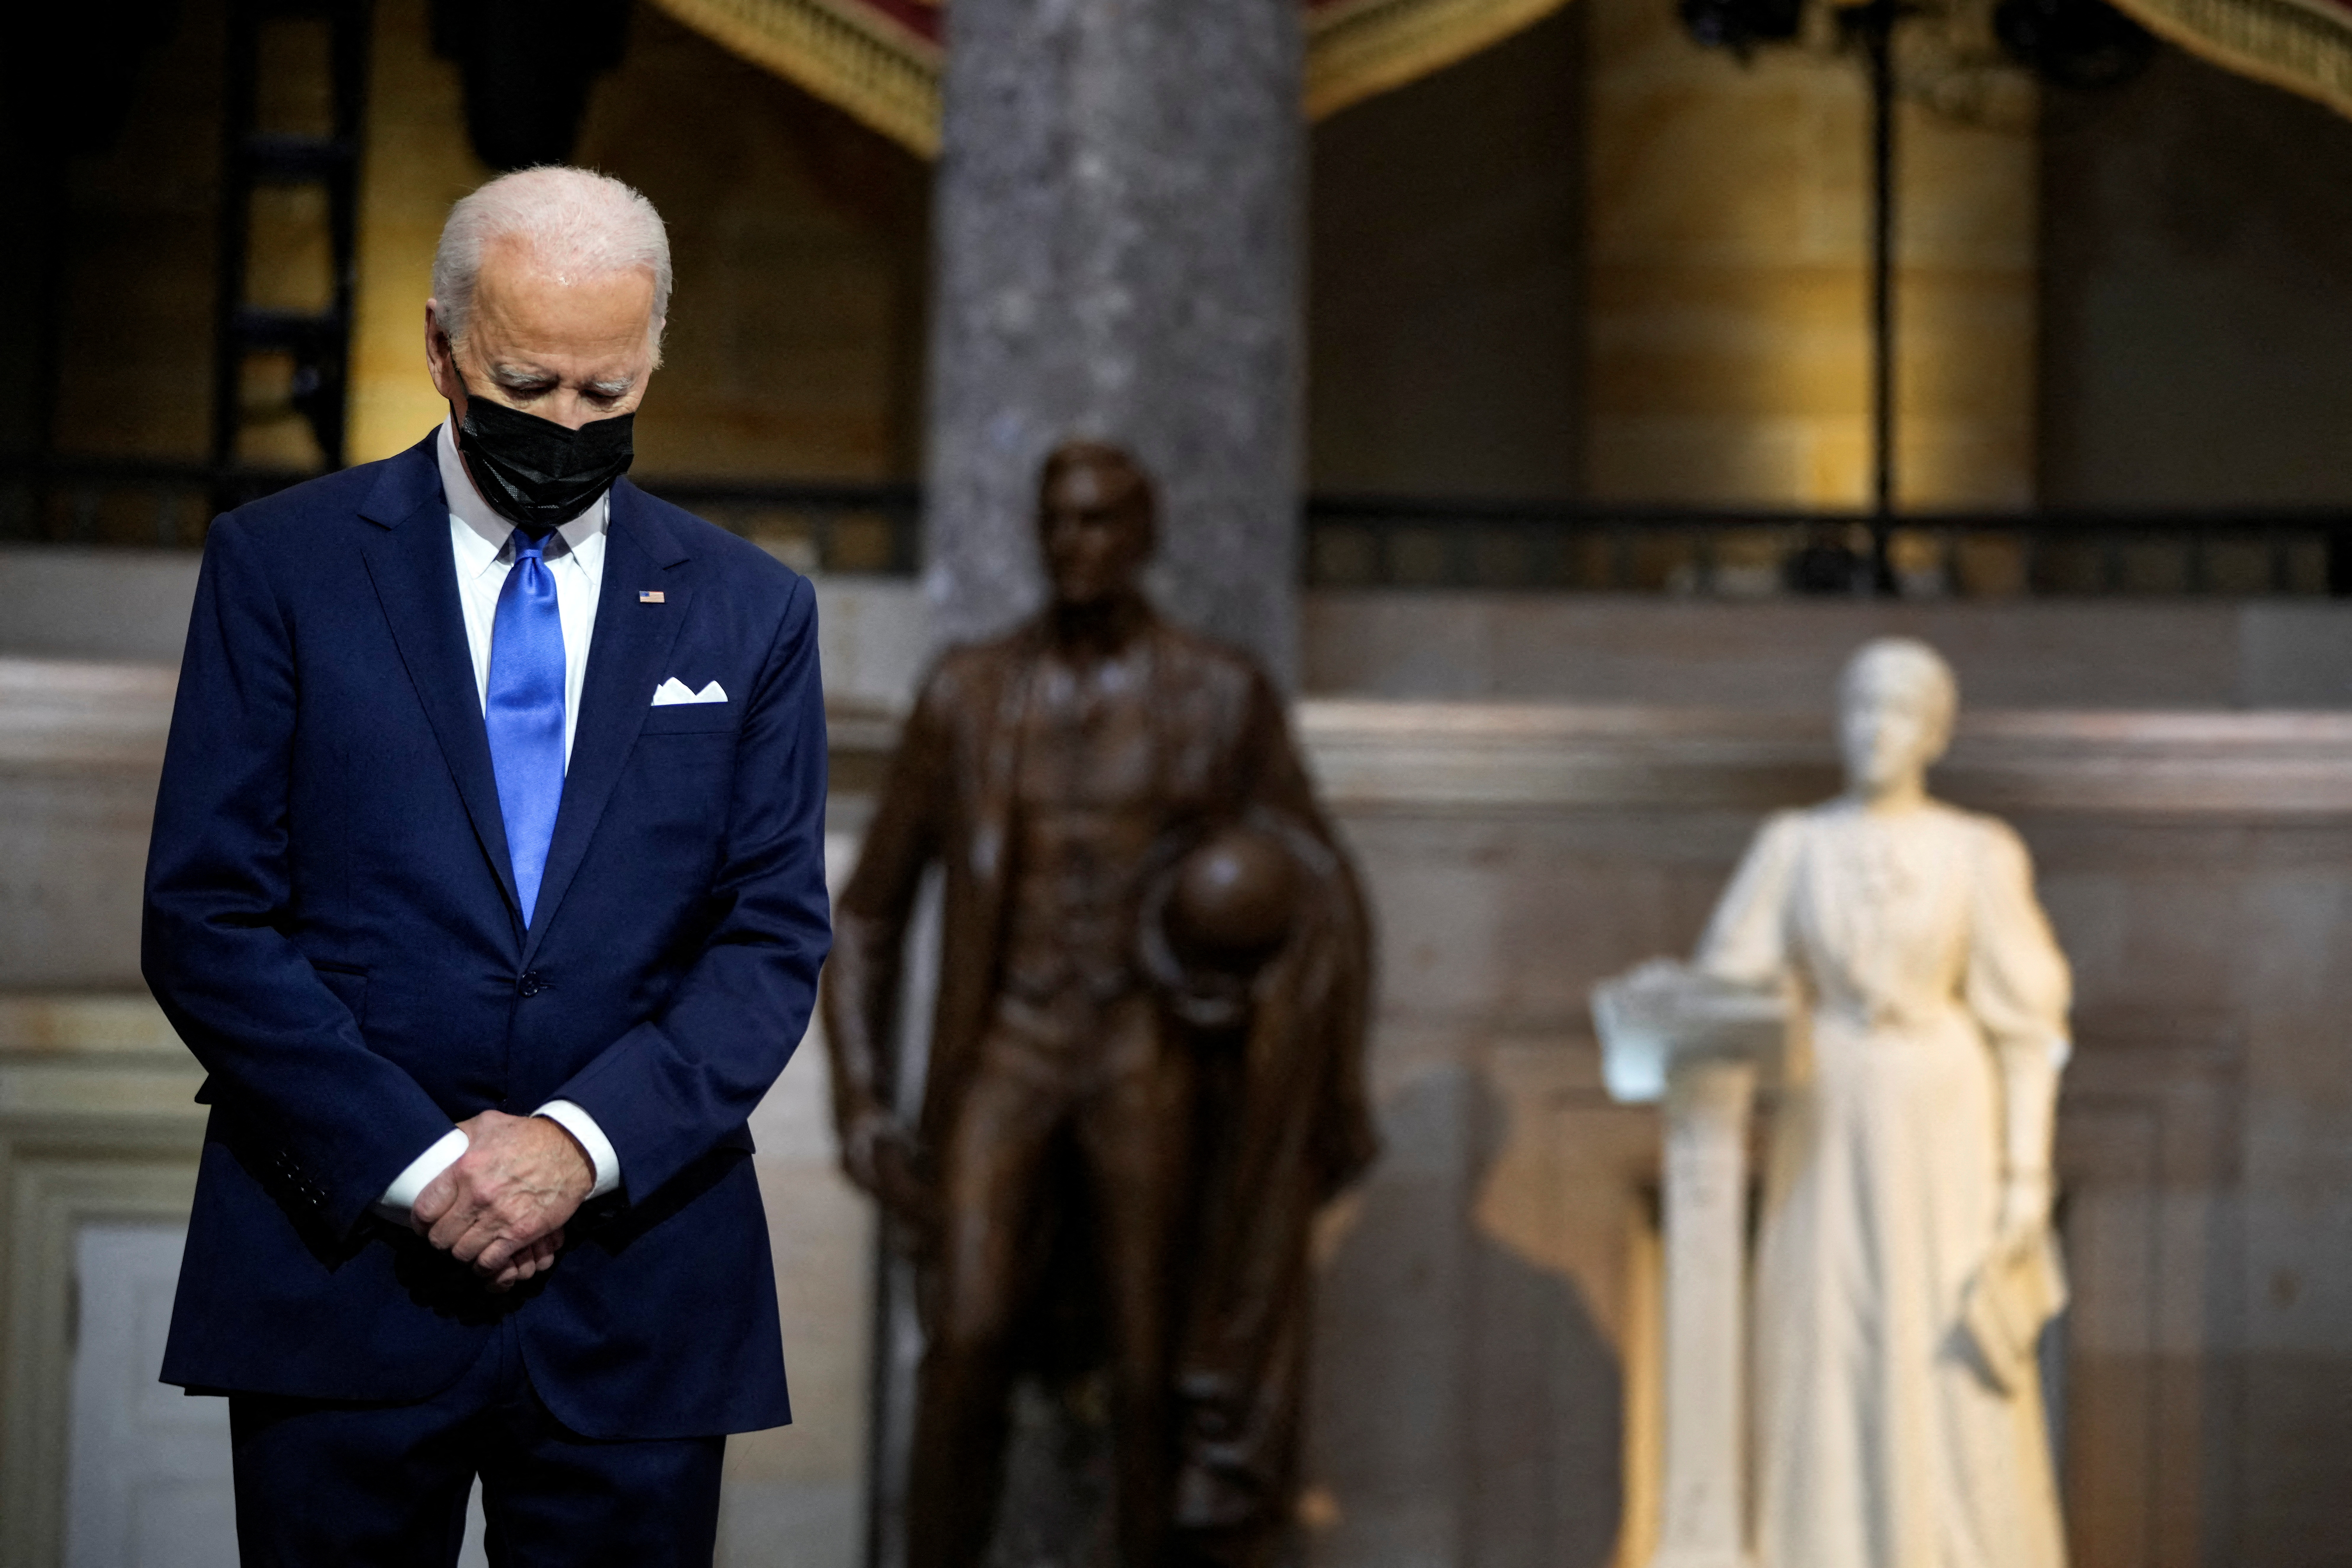 U.S. President Joe Biden listens as Vice President Kamala Harris delivers remarks in the Statuary Hall of the U.S. Capitol during a ceremony on the first anniversary of the January 6, 2021 attack on the U.S. Capitol by supporters of former President Donald Trump in Washington, D.C., U.S., January 6, 2022. Drew Angerer/Pool via REUTERS